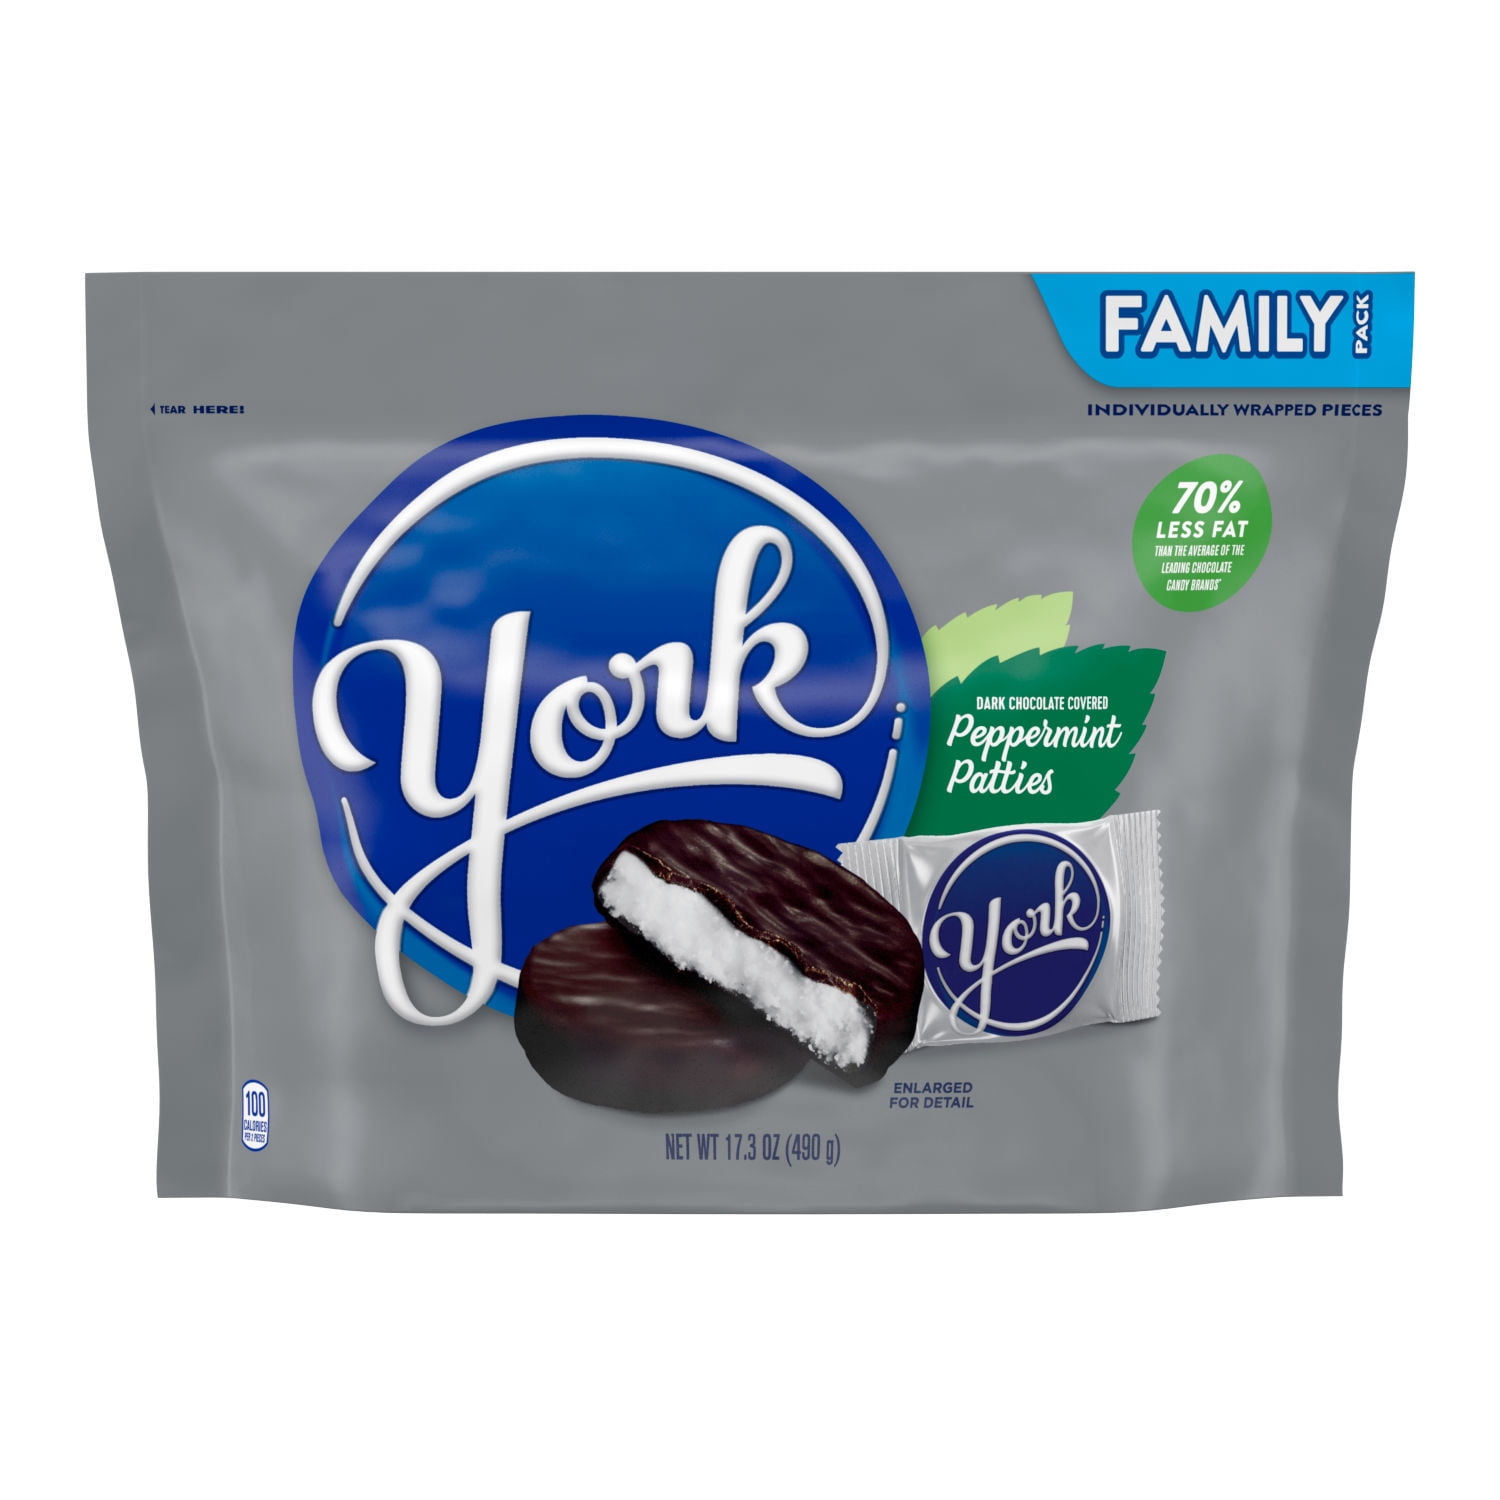 YORK Dark Chocolate Covered Minty, Easter Peppermint Patties Candy Family Pack, 17.3 oz